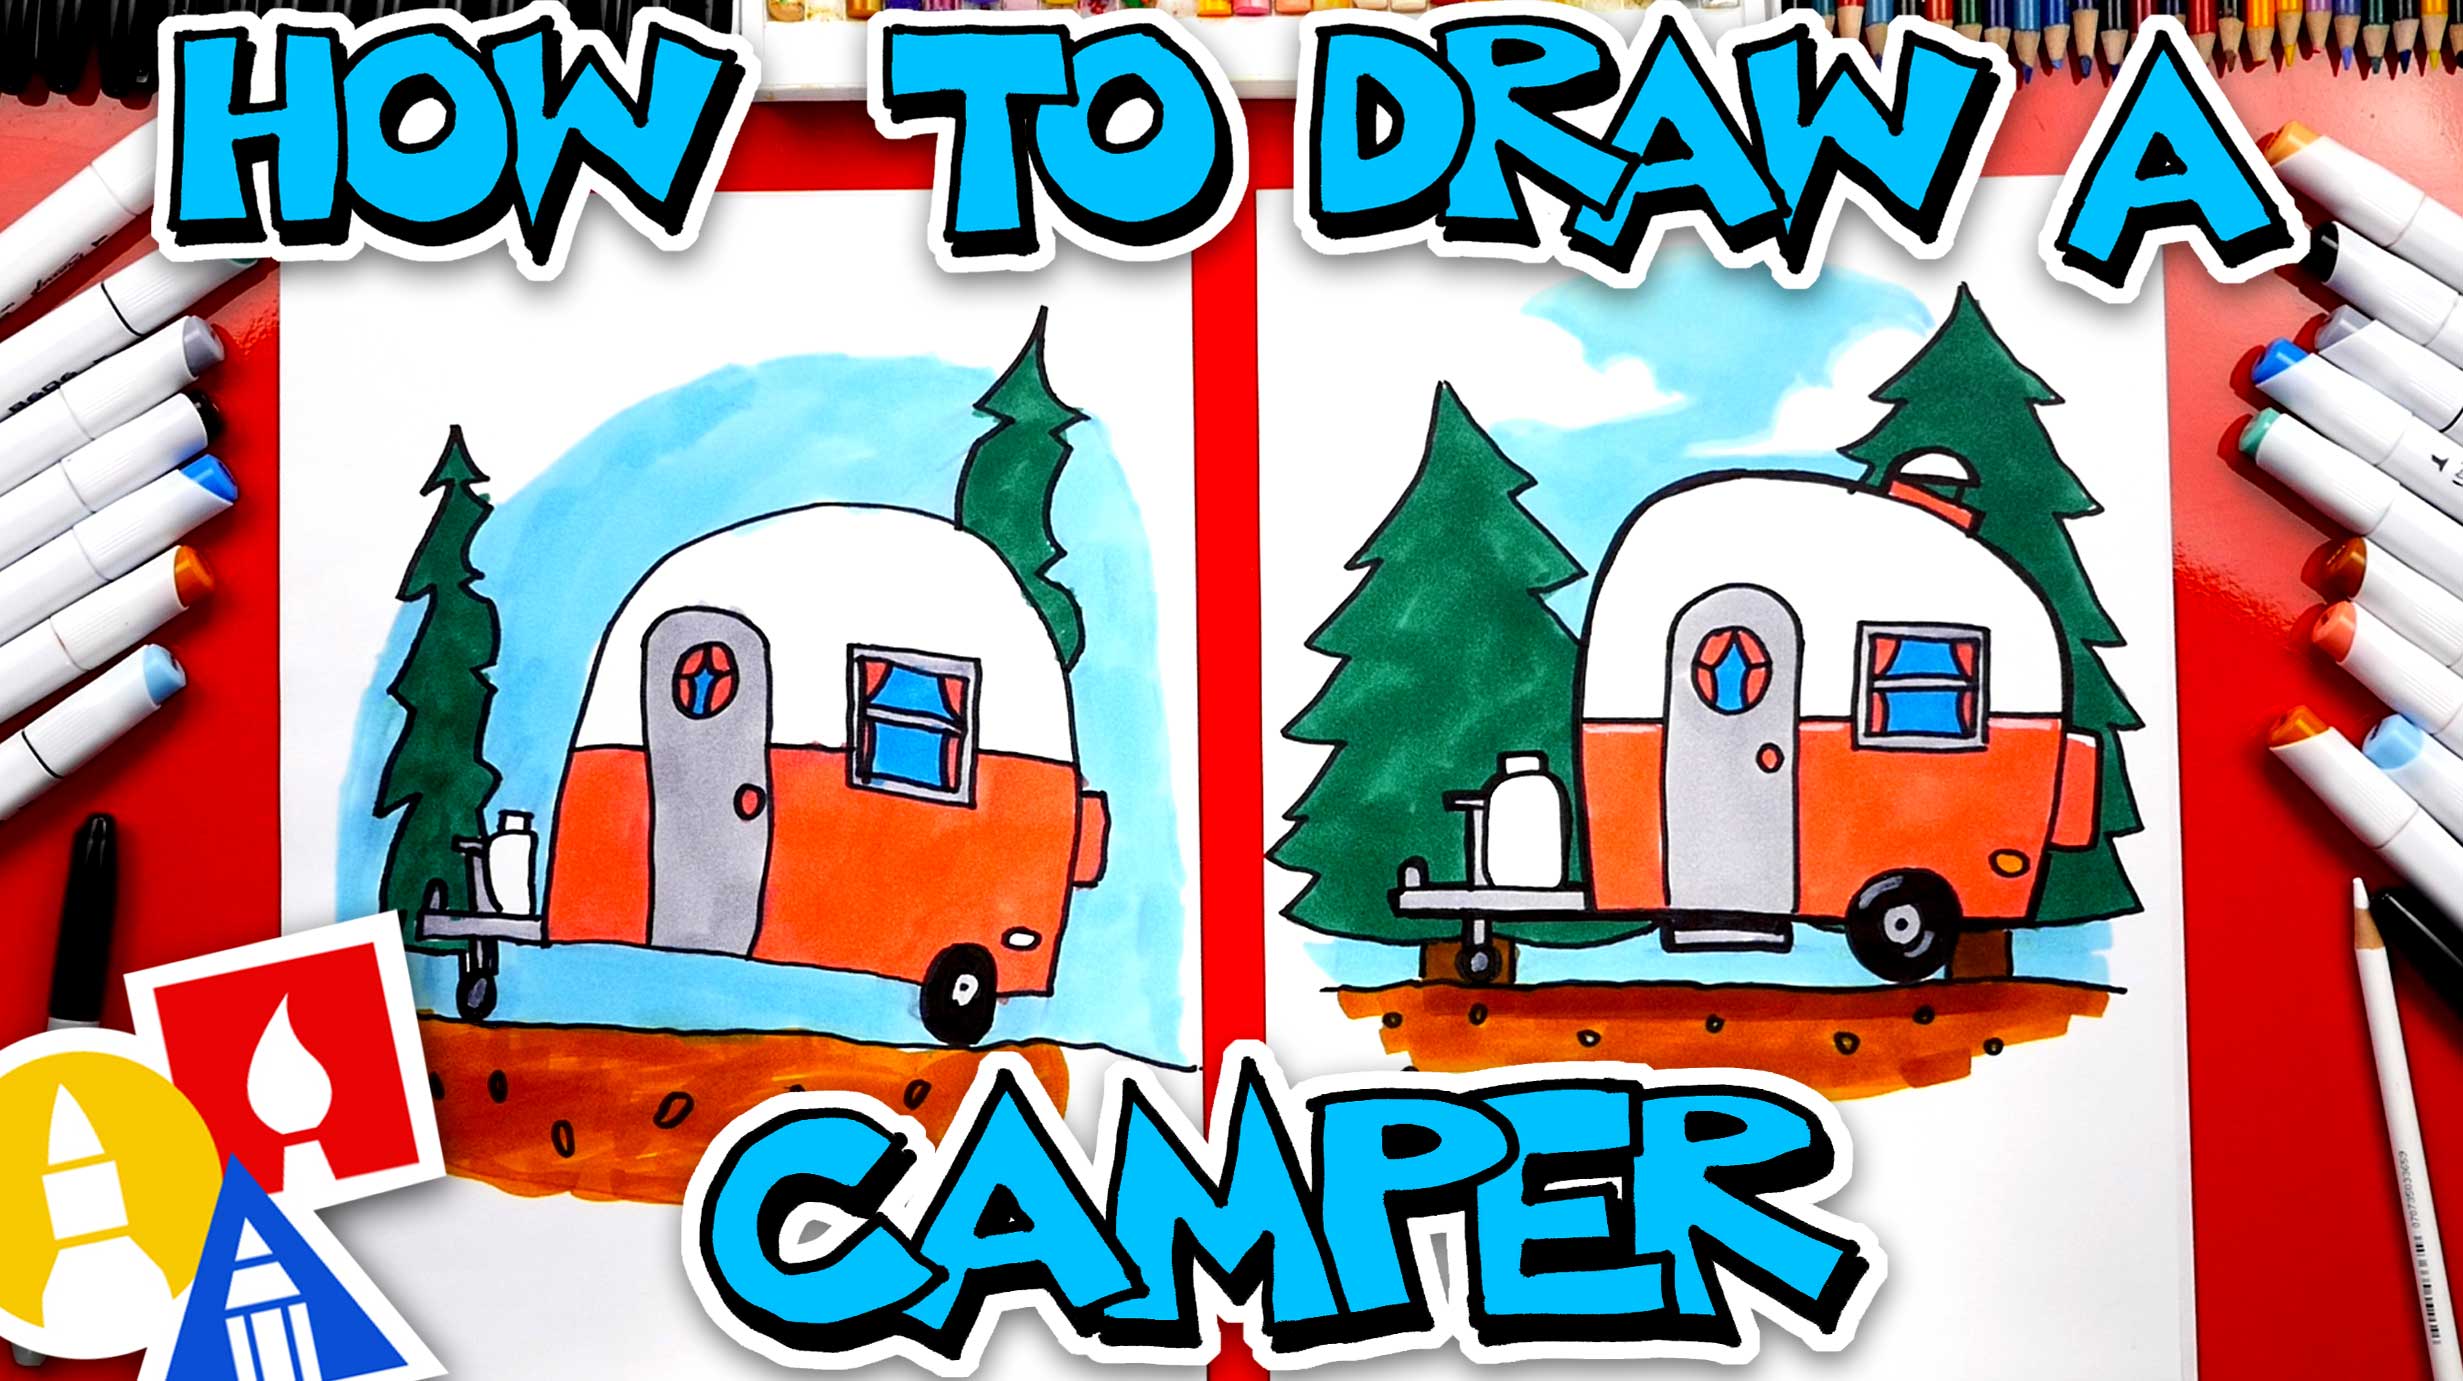 How To Draw An RV Camper - Art For Kids Hub